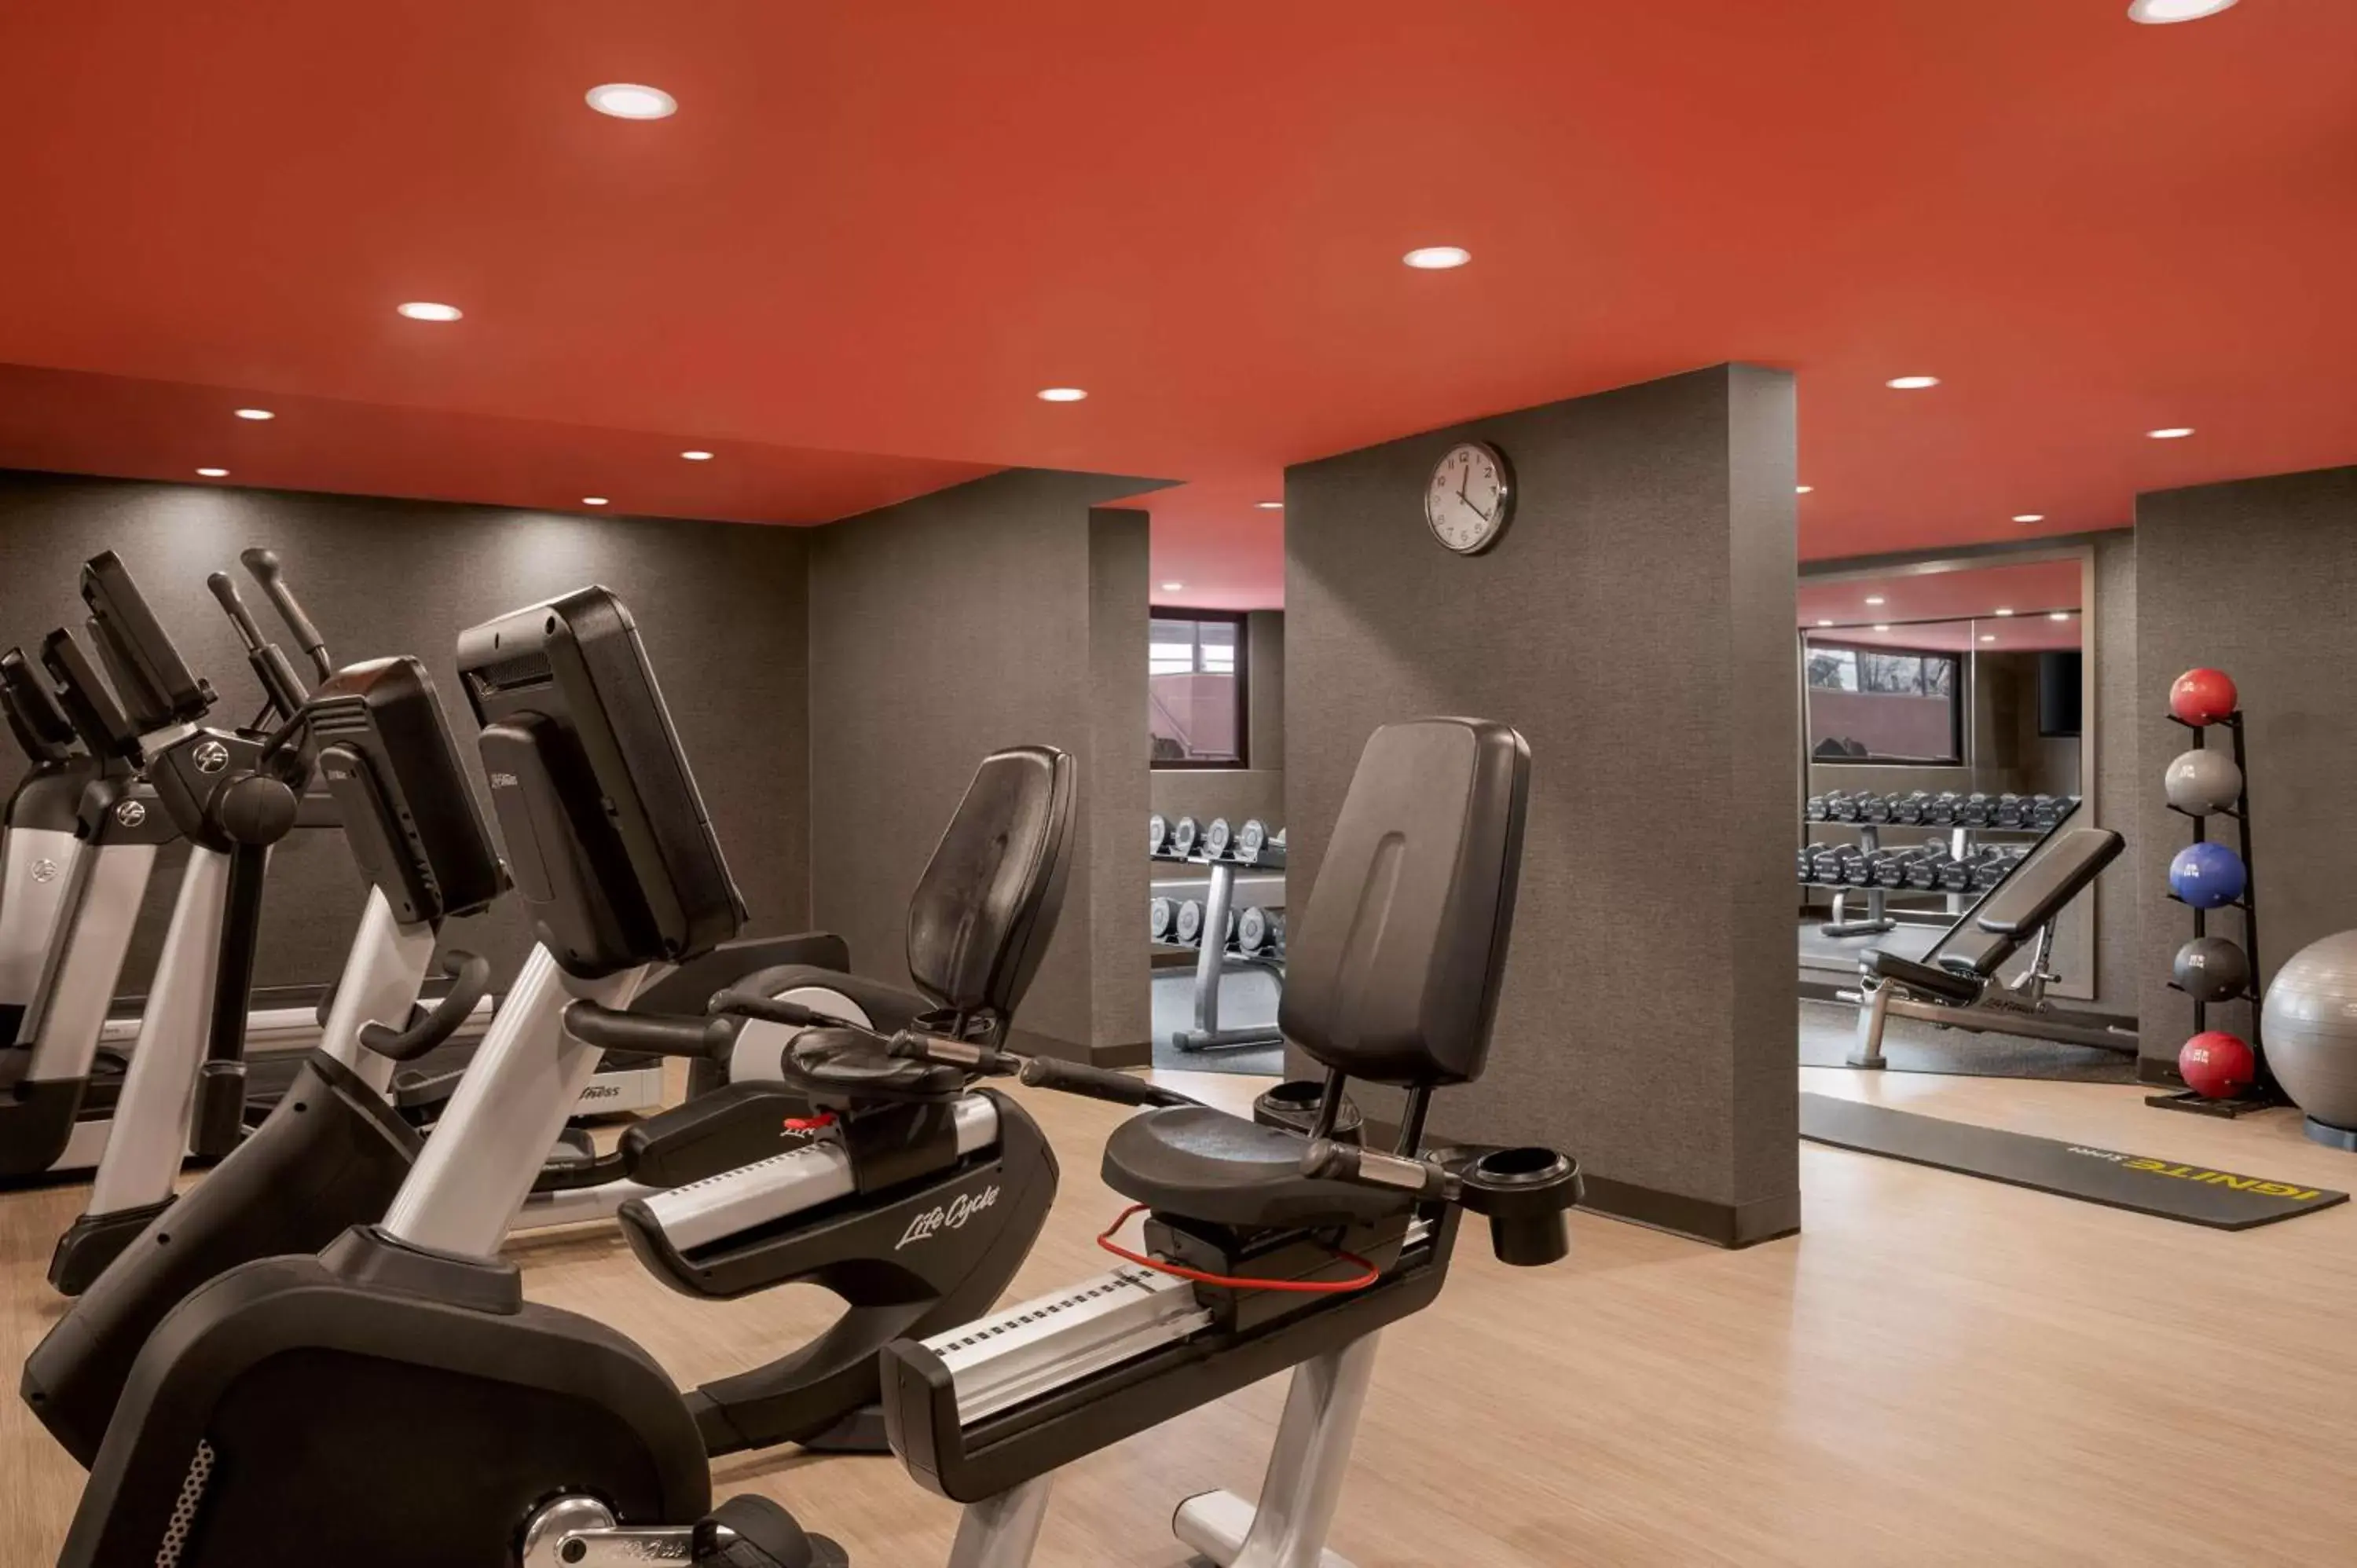 Fitness centre/facilities, Fitness Center/Facilities in Hilton Vancouver Airport